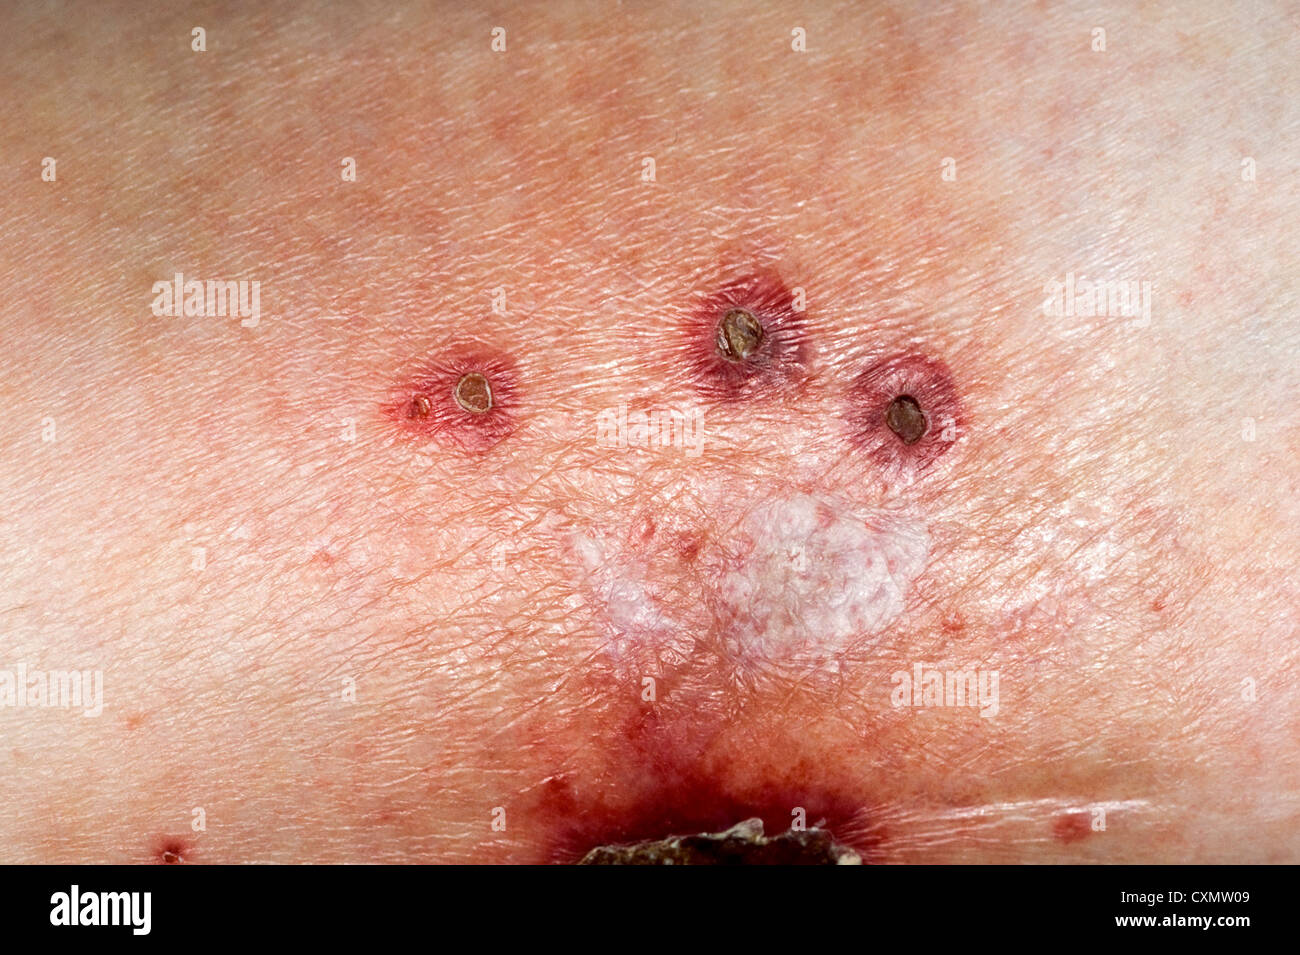 lesions on the leg due to vasculitis; small ulcerated lesions due to inflammation and necrosis of blood vessels Stock Photo